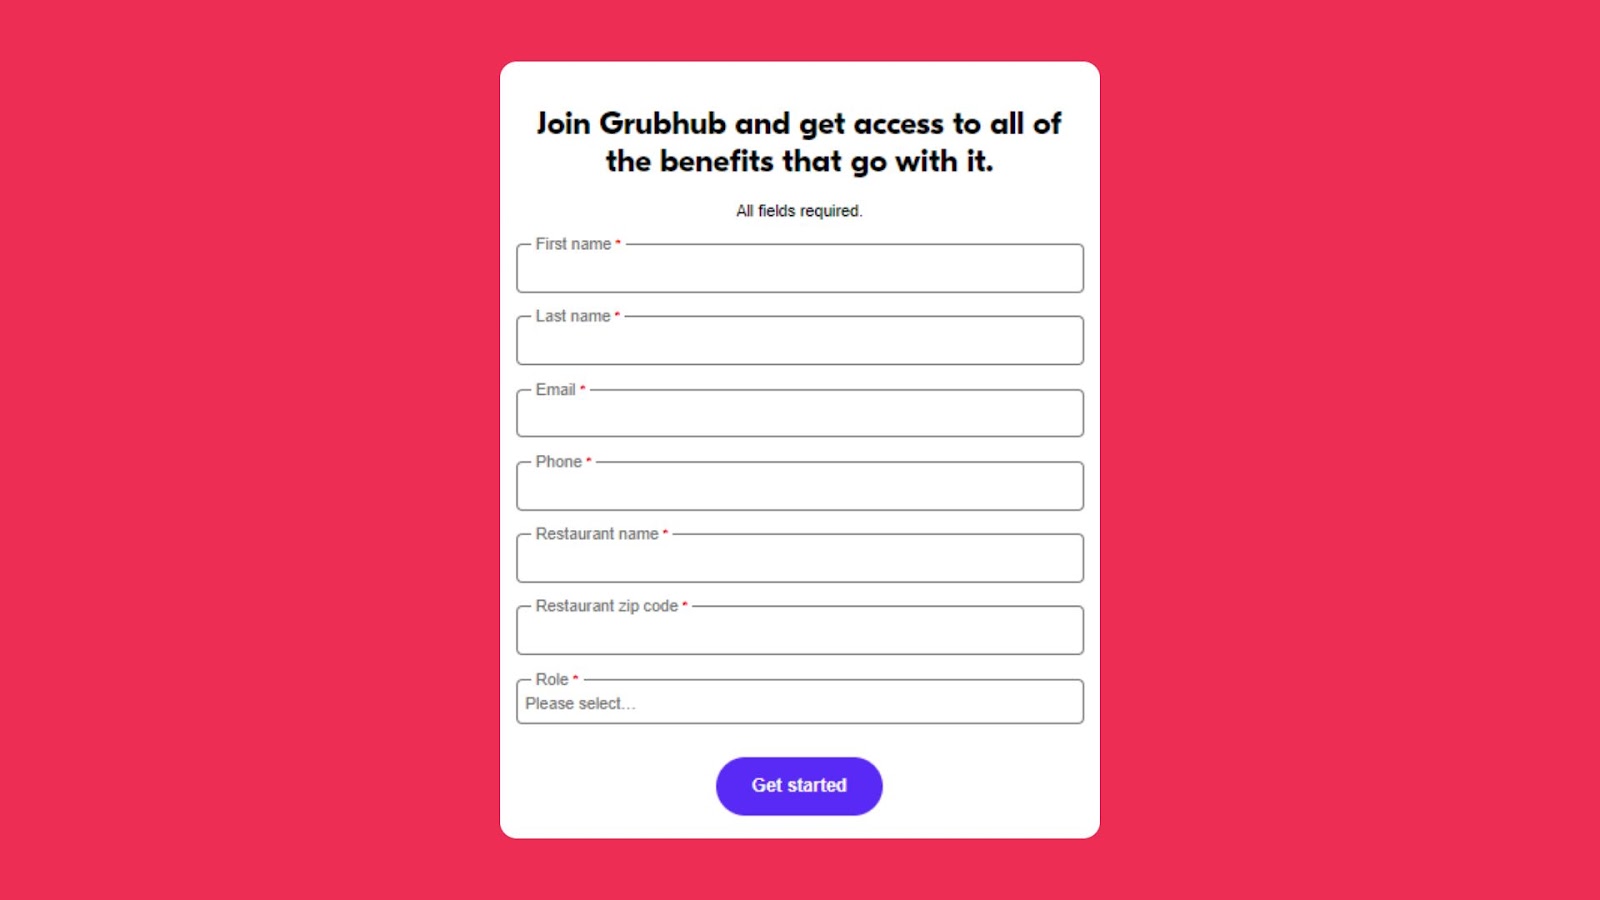 Sign-up form for Grubhub. The form includes fields for First Name, Last Name, Email, Phone, Restaurant Name, Restaurant Zip Code, and Role with a 'Get started' button at the bottom